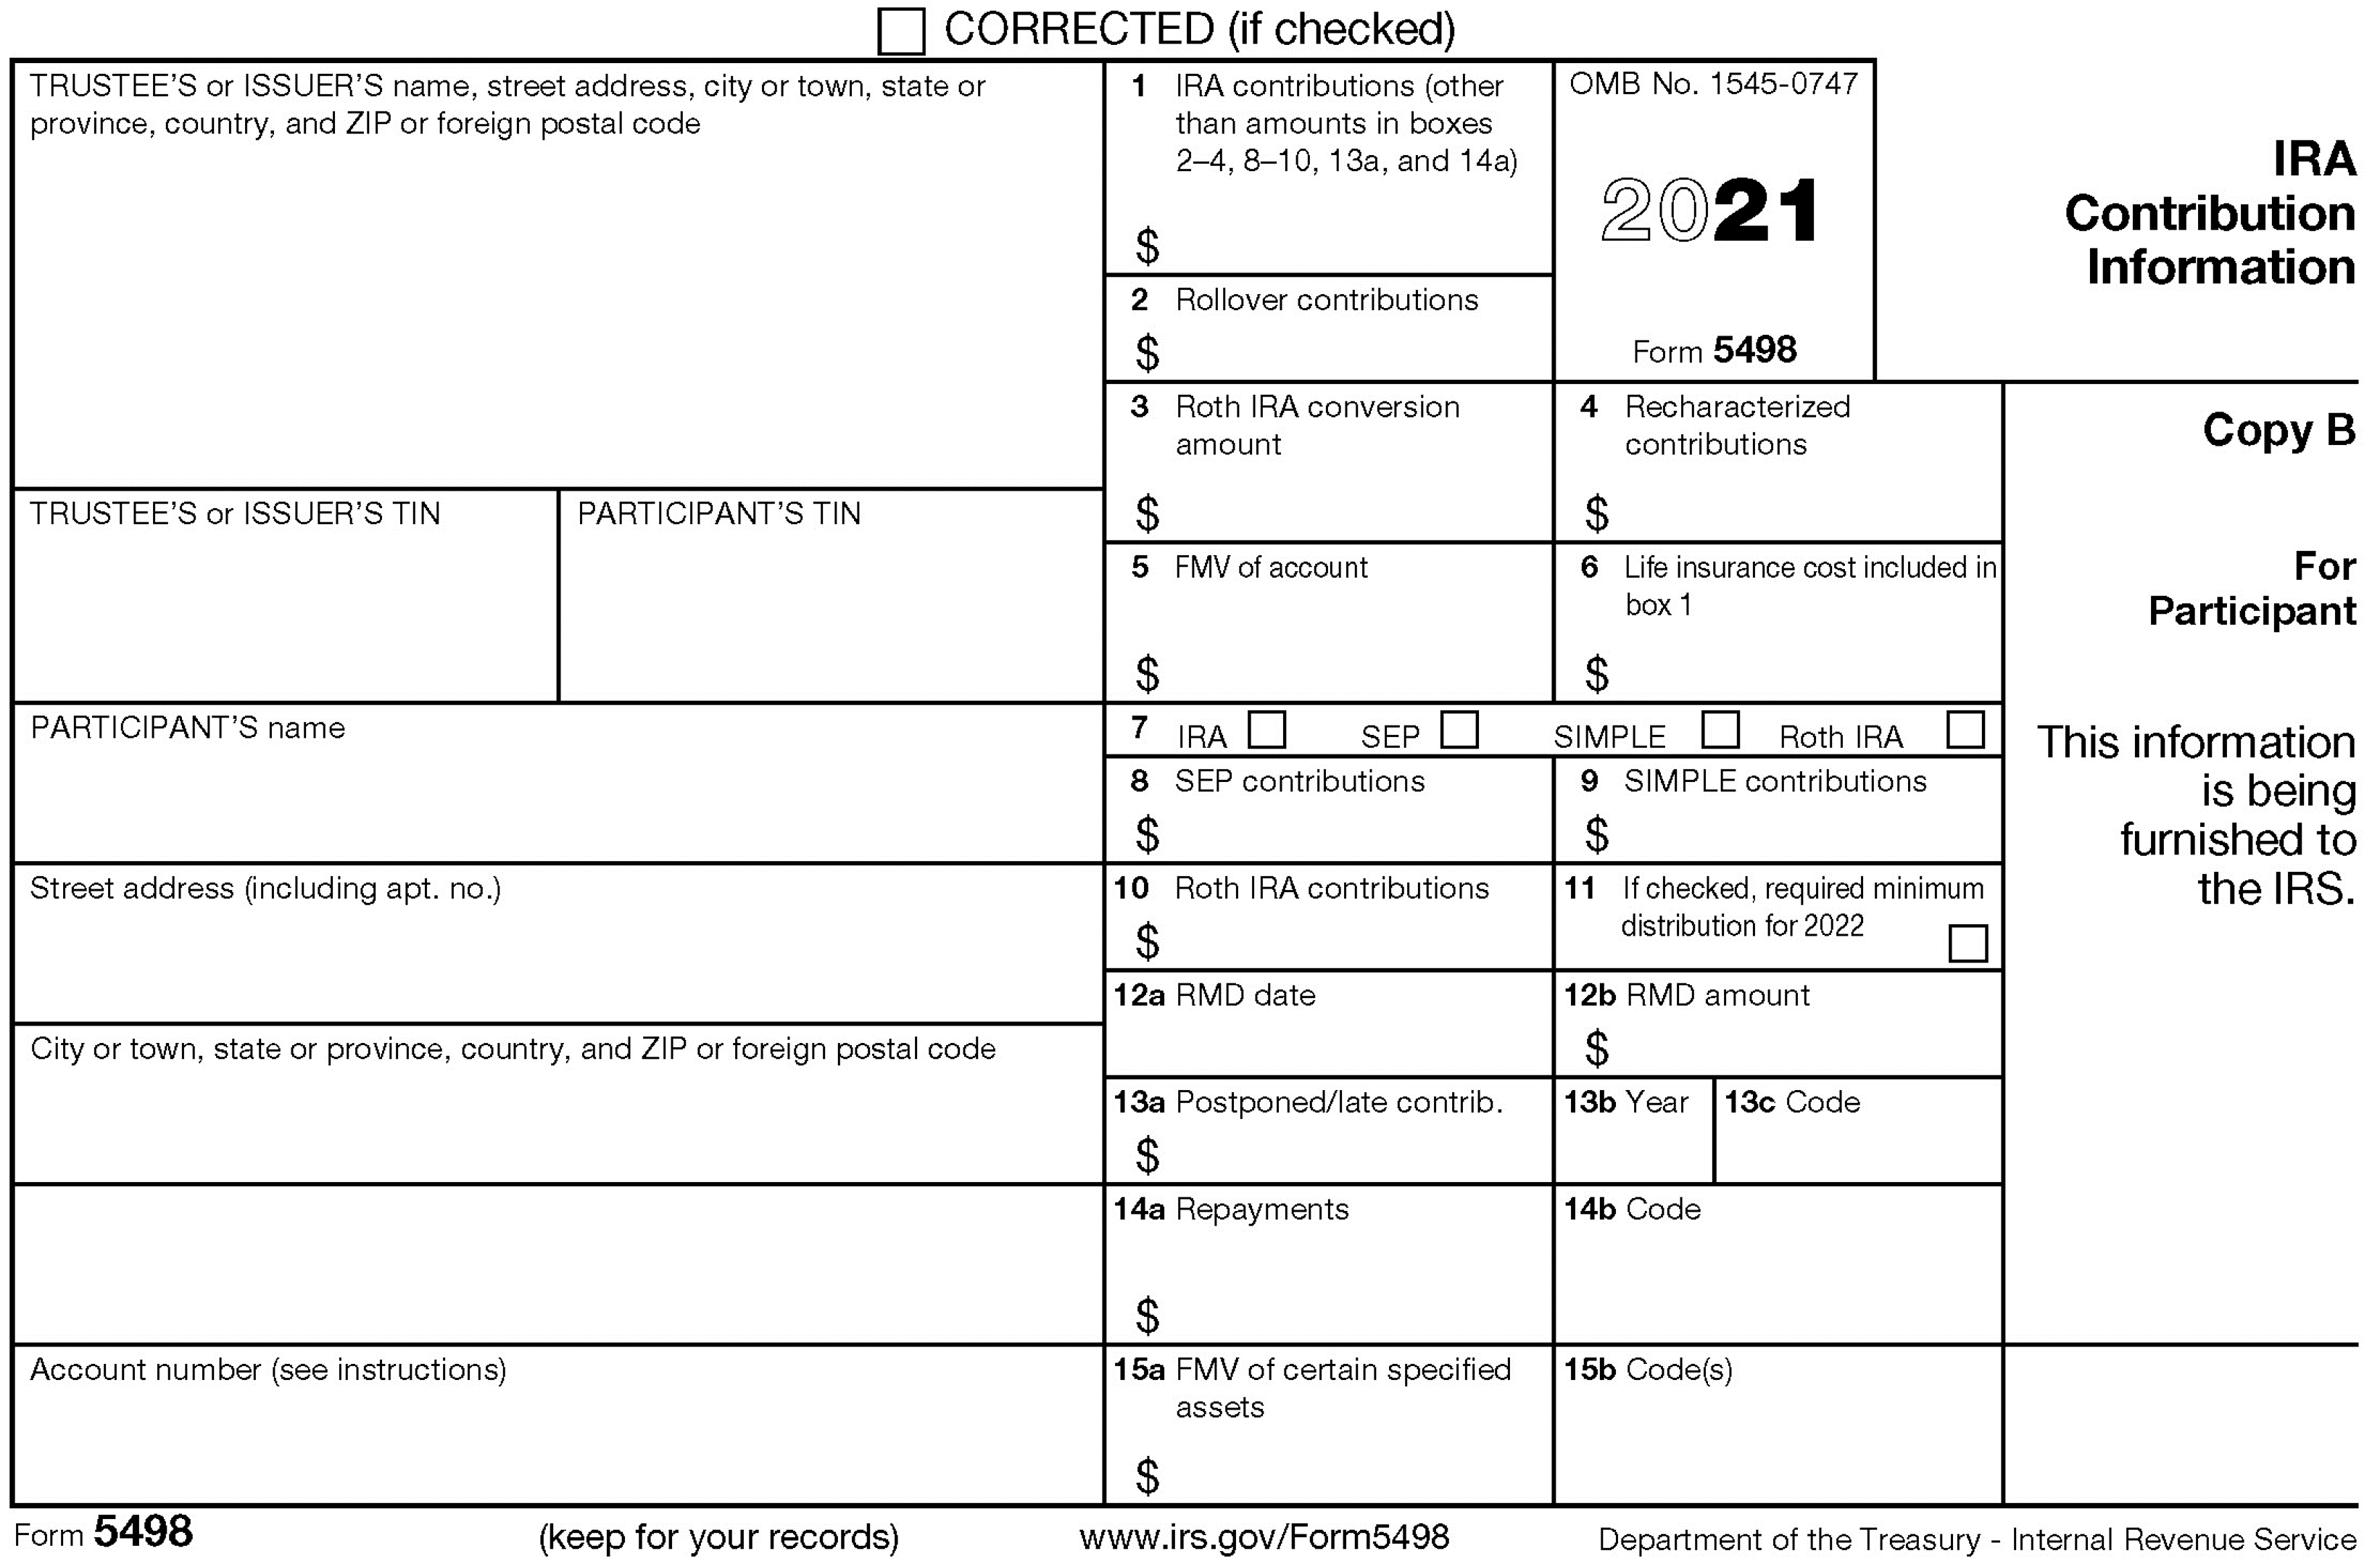 2021 contribution reporting on IRS Form 5498